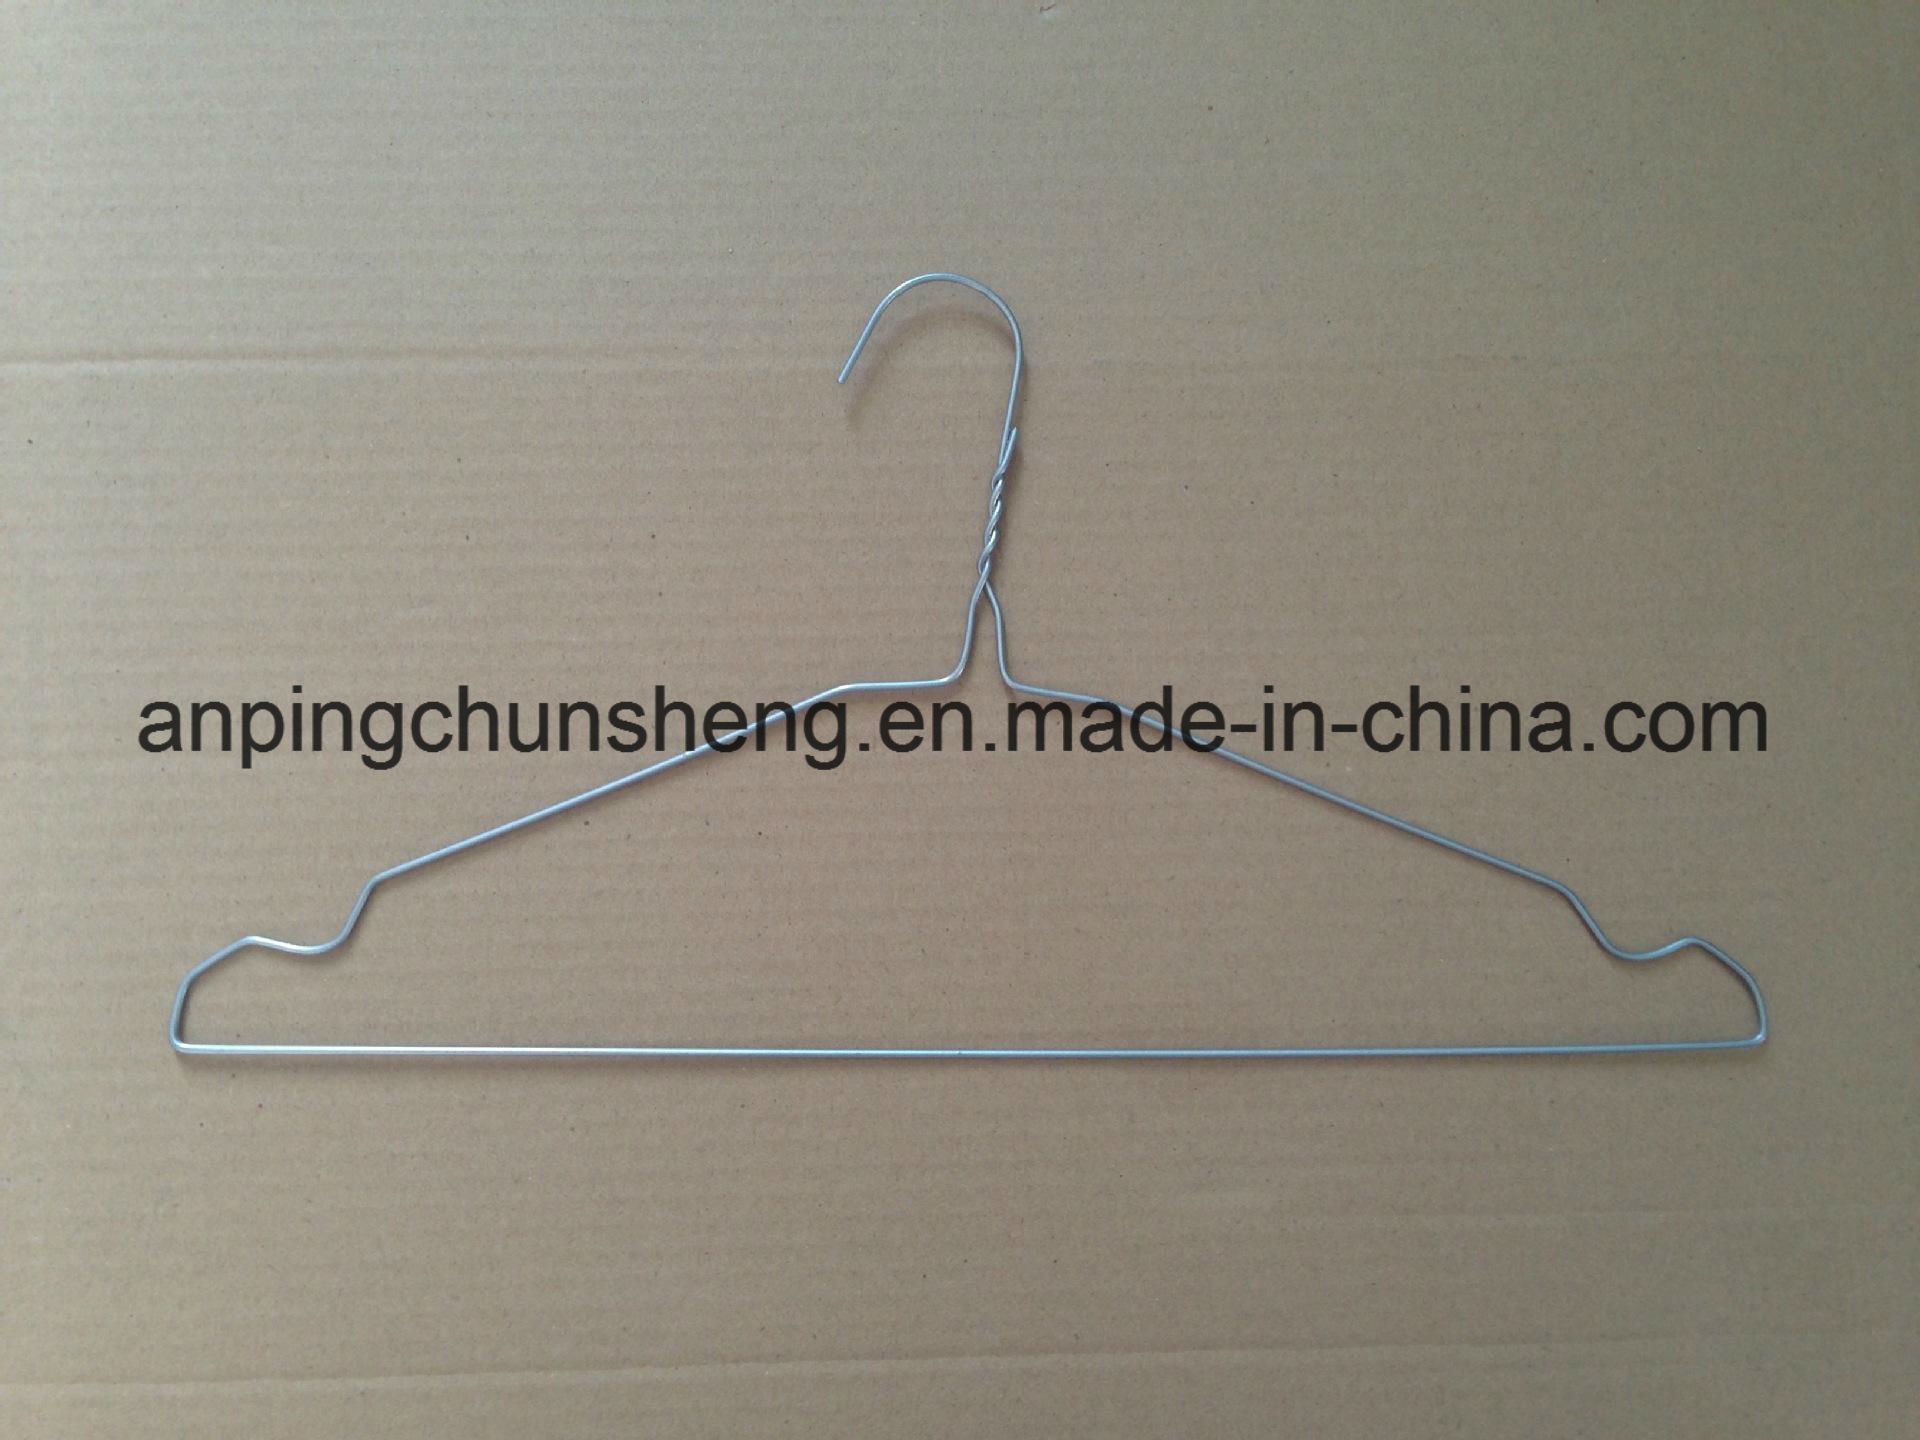 /proimages/2f0j00NslTZCahCnpE/green-metal-wire-dry-cleaning-hangers-for-laundry-clothes.jpg